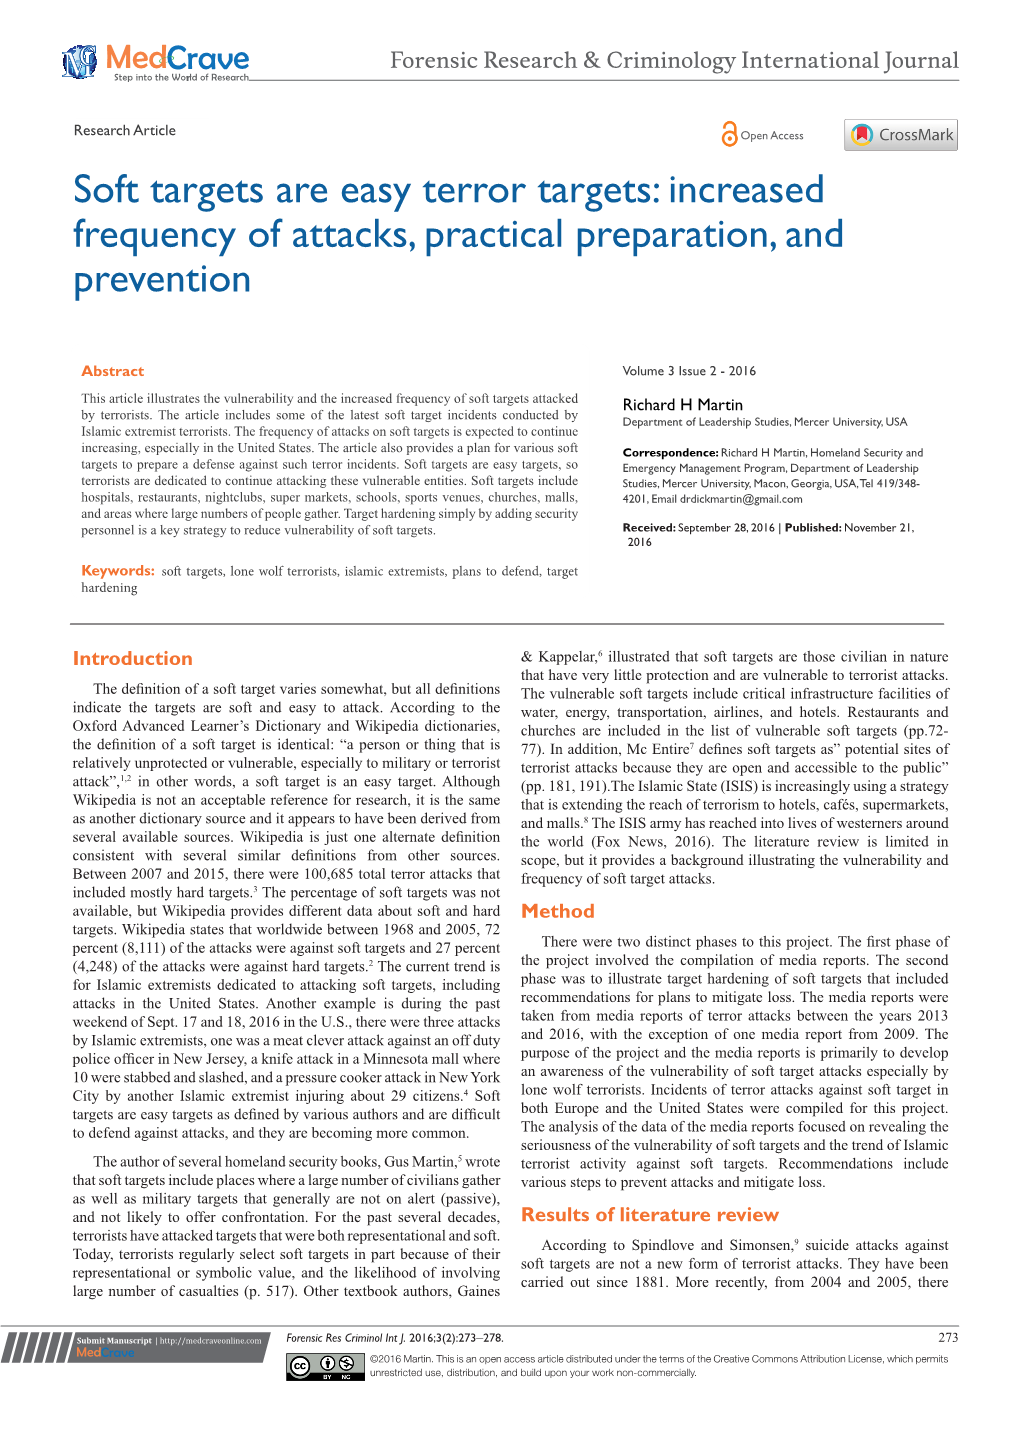 Soft Targets Are Easy Terror Targets: Increased Frequency of Attacks, Practical Preparation, and Prevention